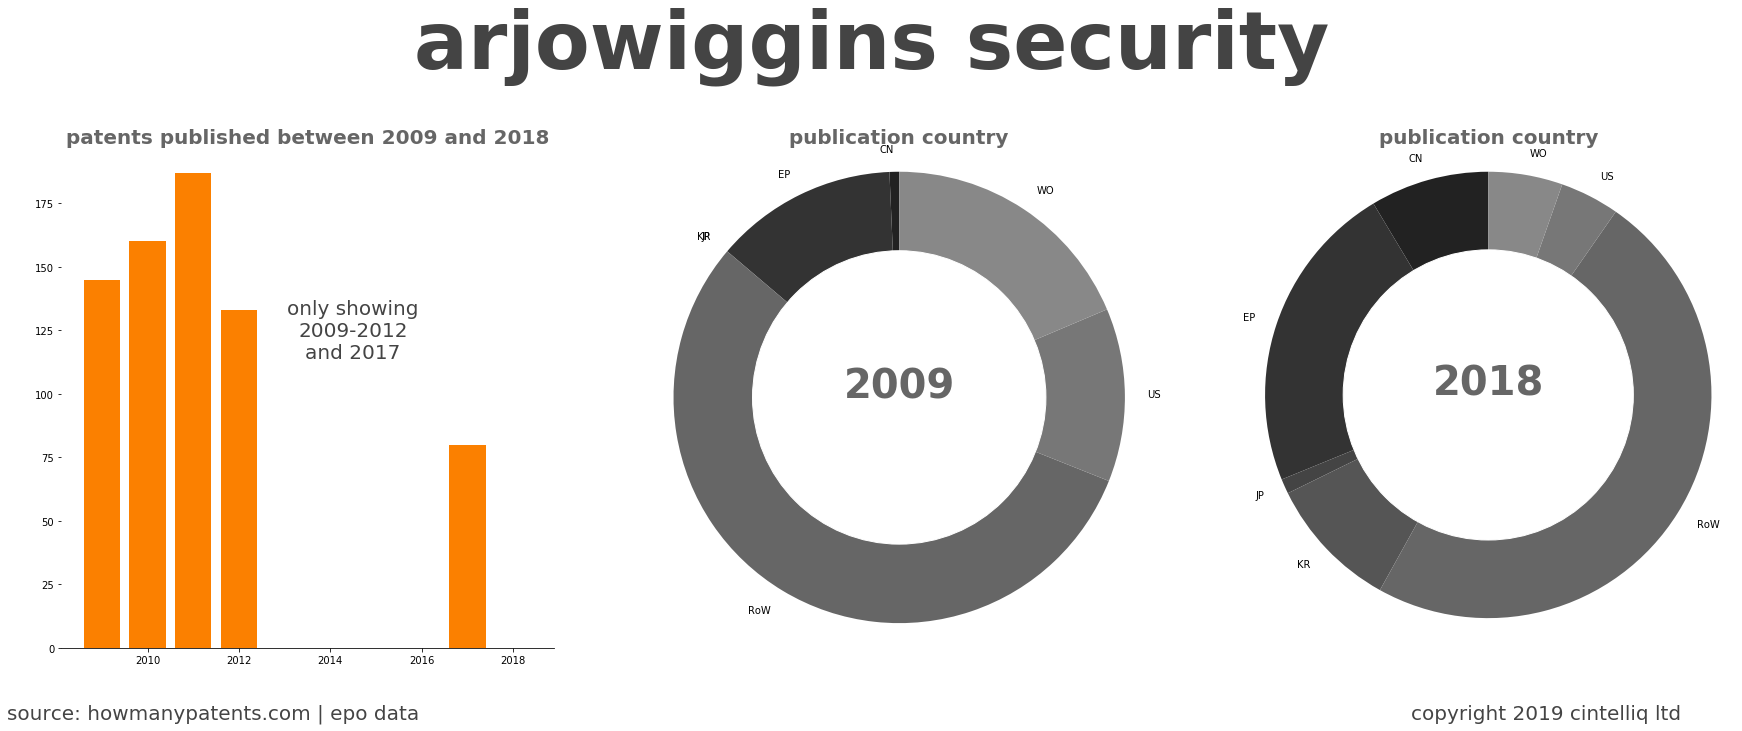 summary of patents for Arjowiggins Security